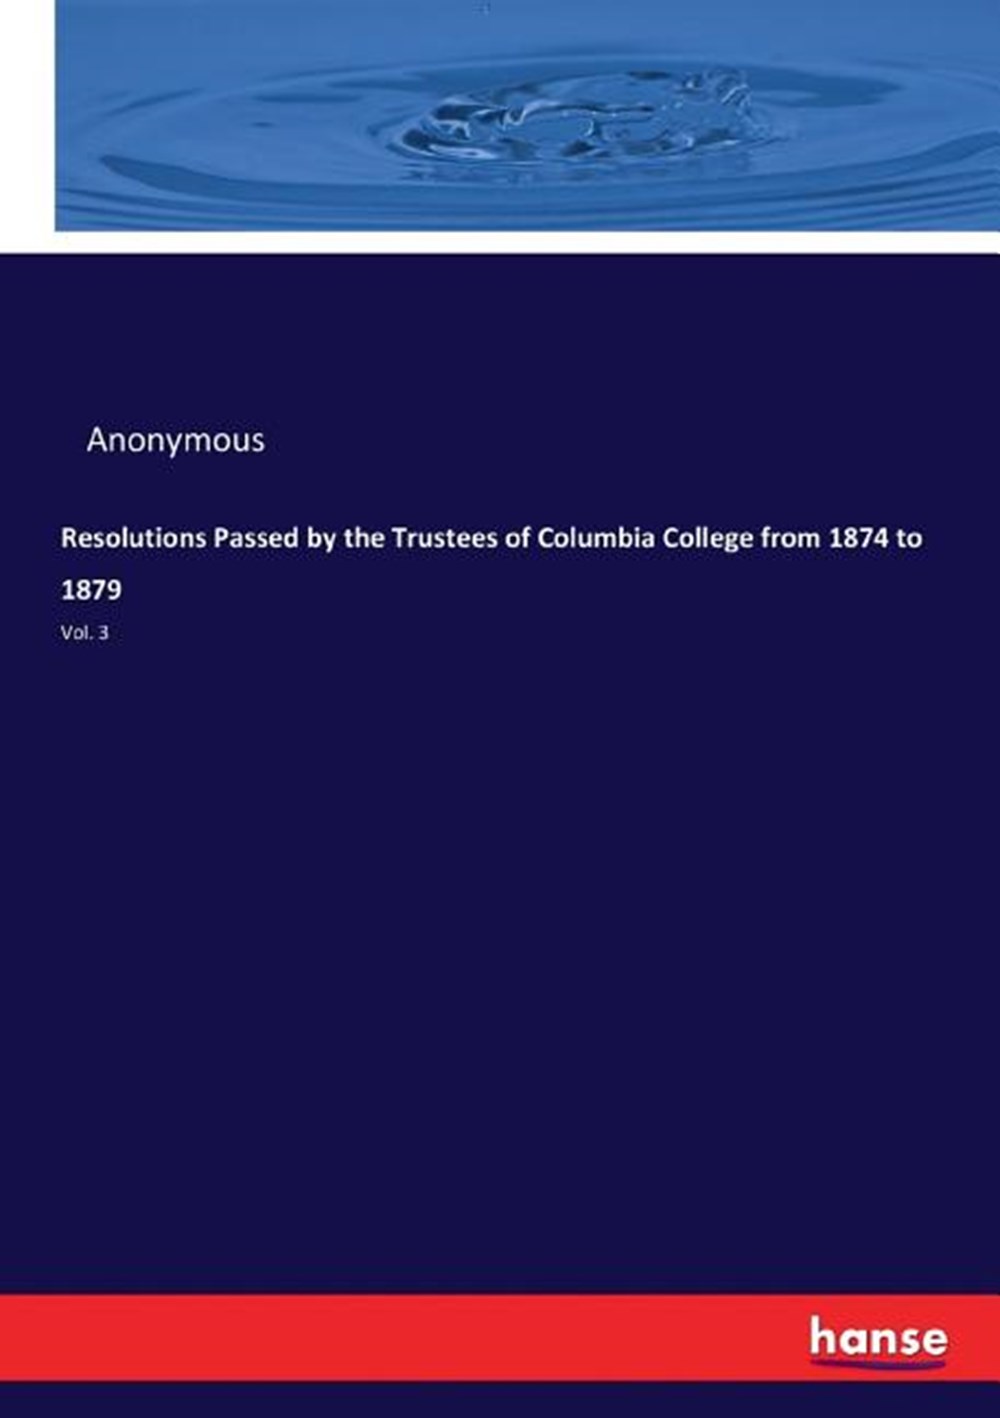 Resolutions Passed by the Trustees of Columbia College from 1874 to 1879: Vol. 3